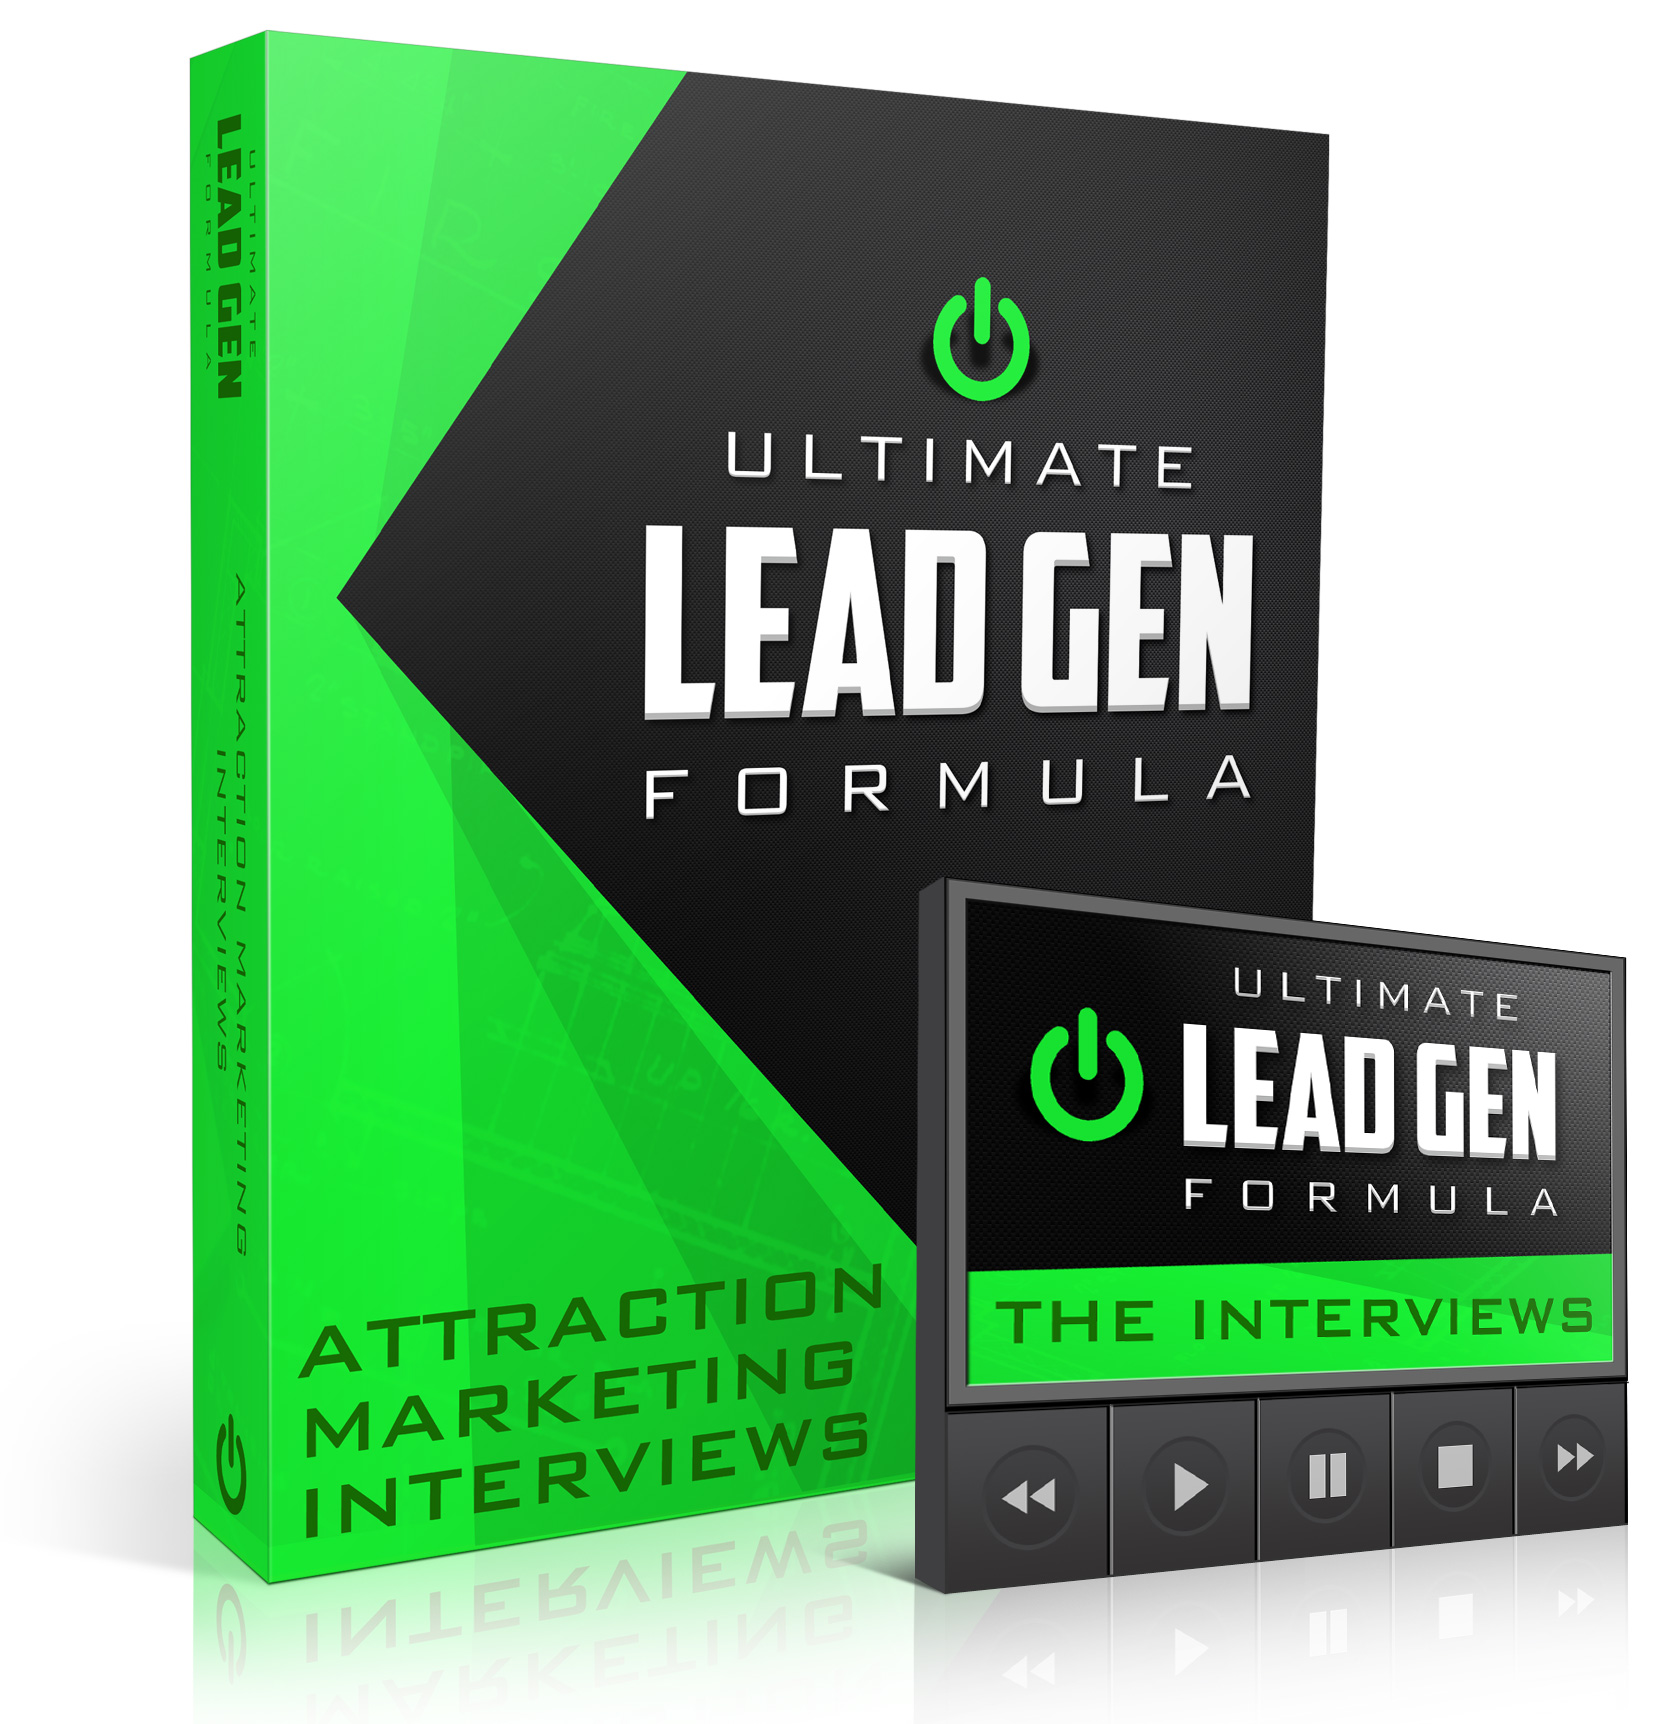 Attraction Marketing Interviews with 6-Figure+ Industry Leaders